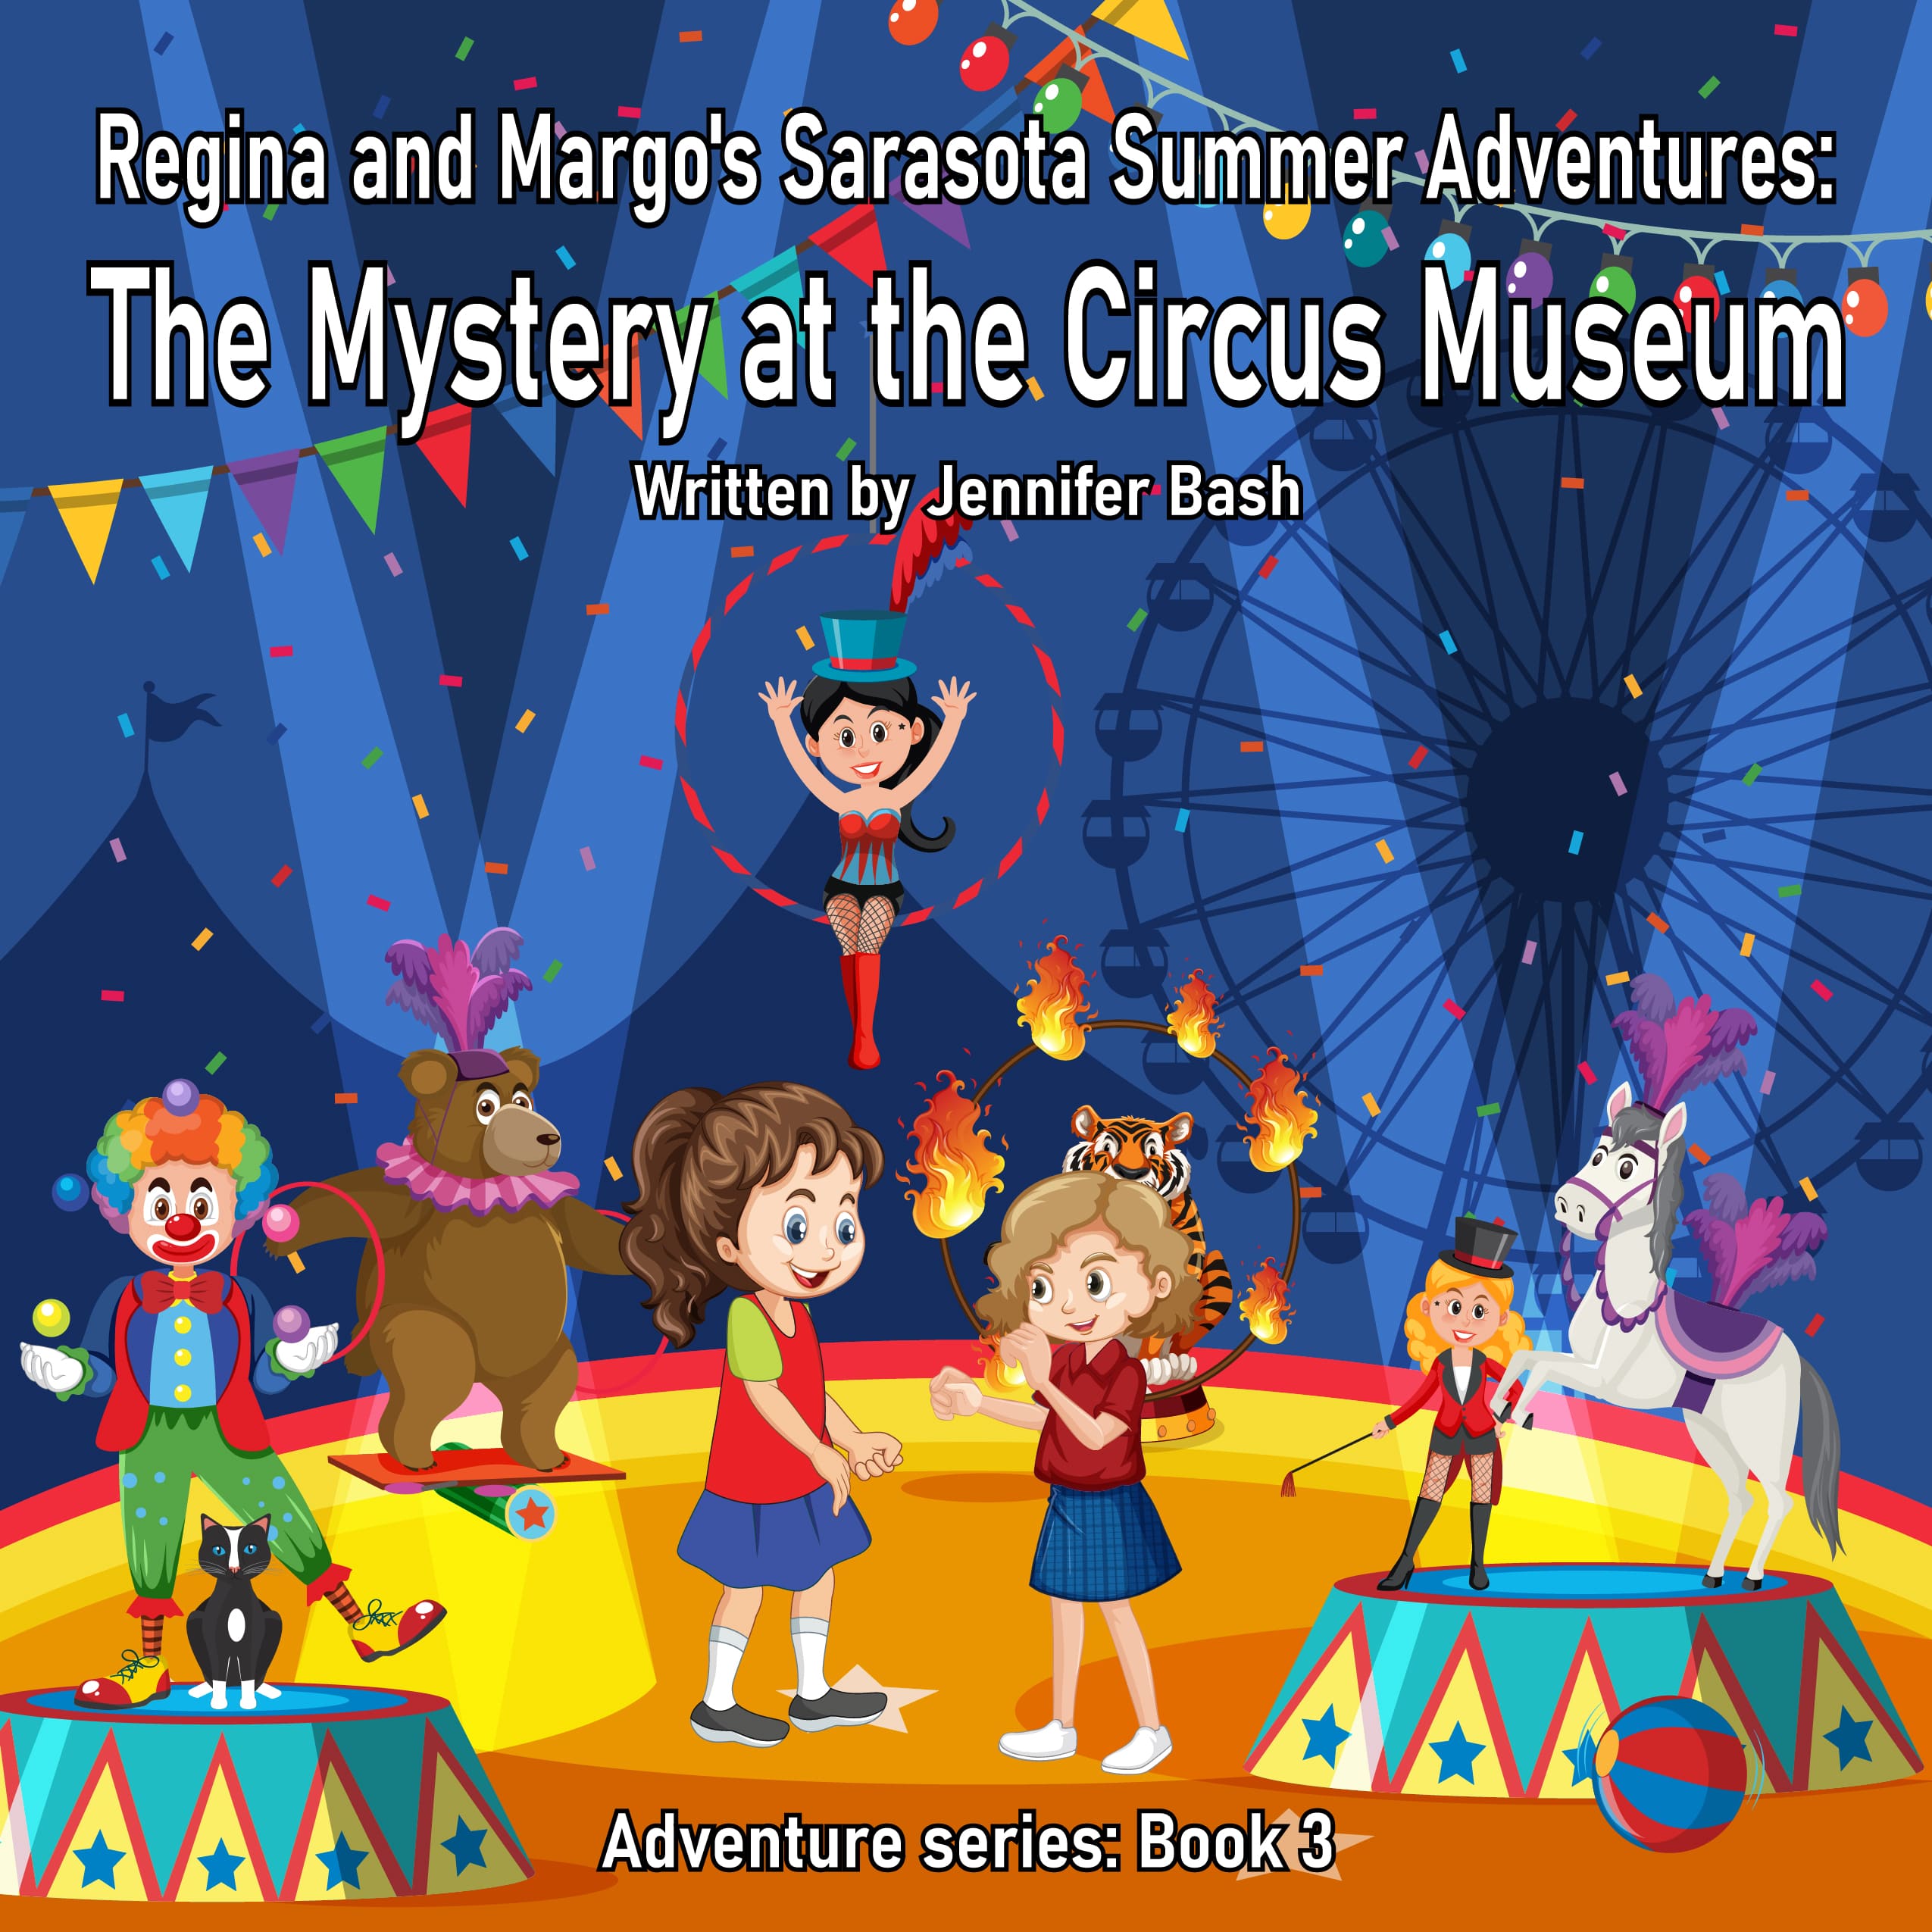 Sarasota Summer Adventures:  The Mystery at the Circus Museum - Book 3